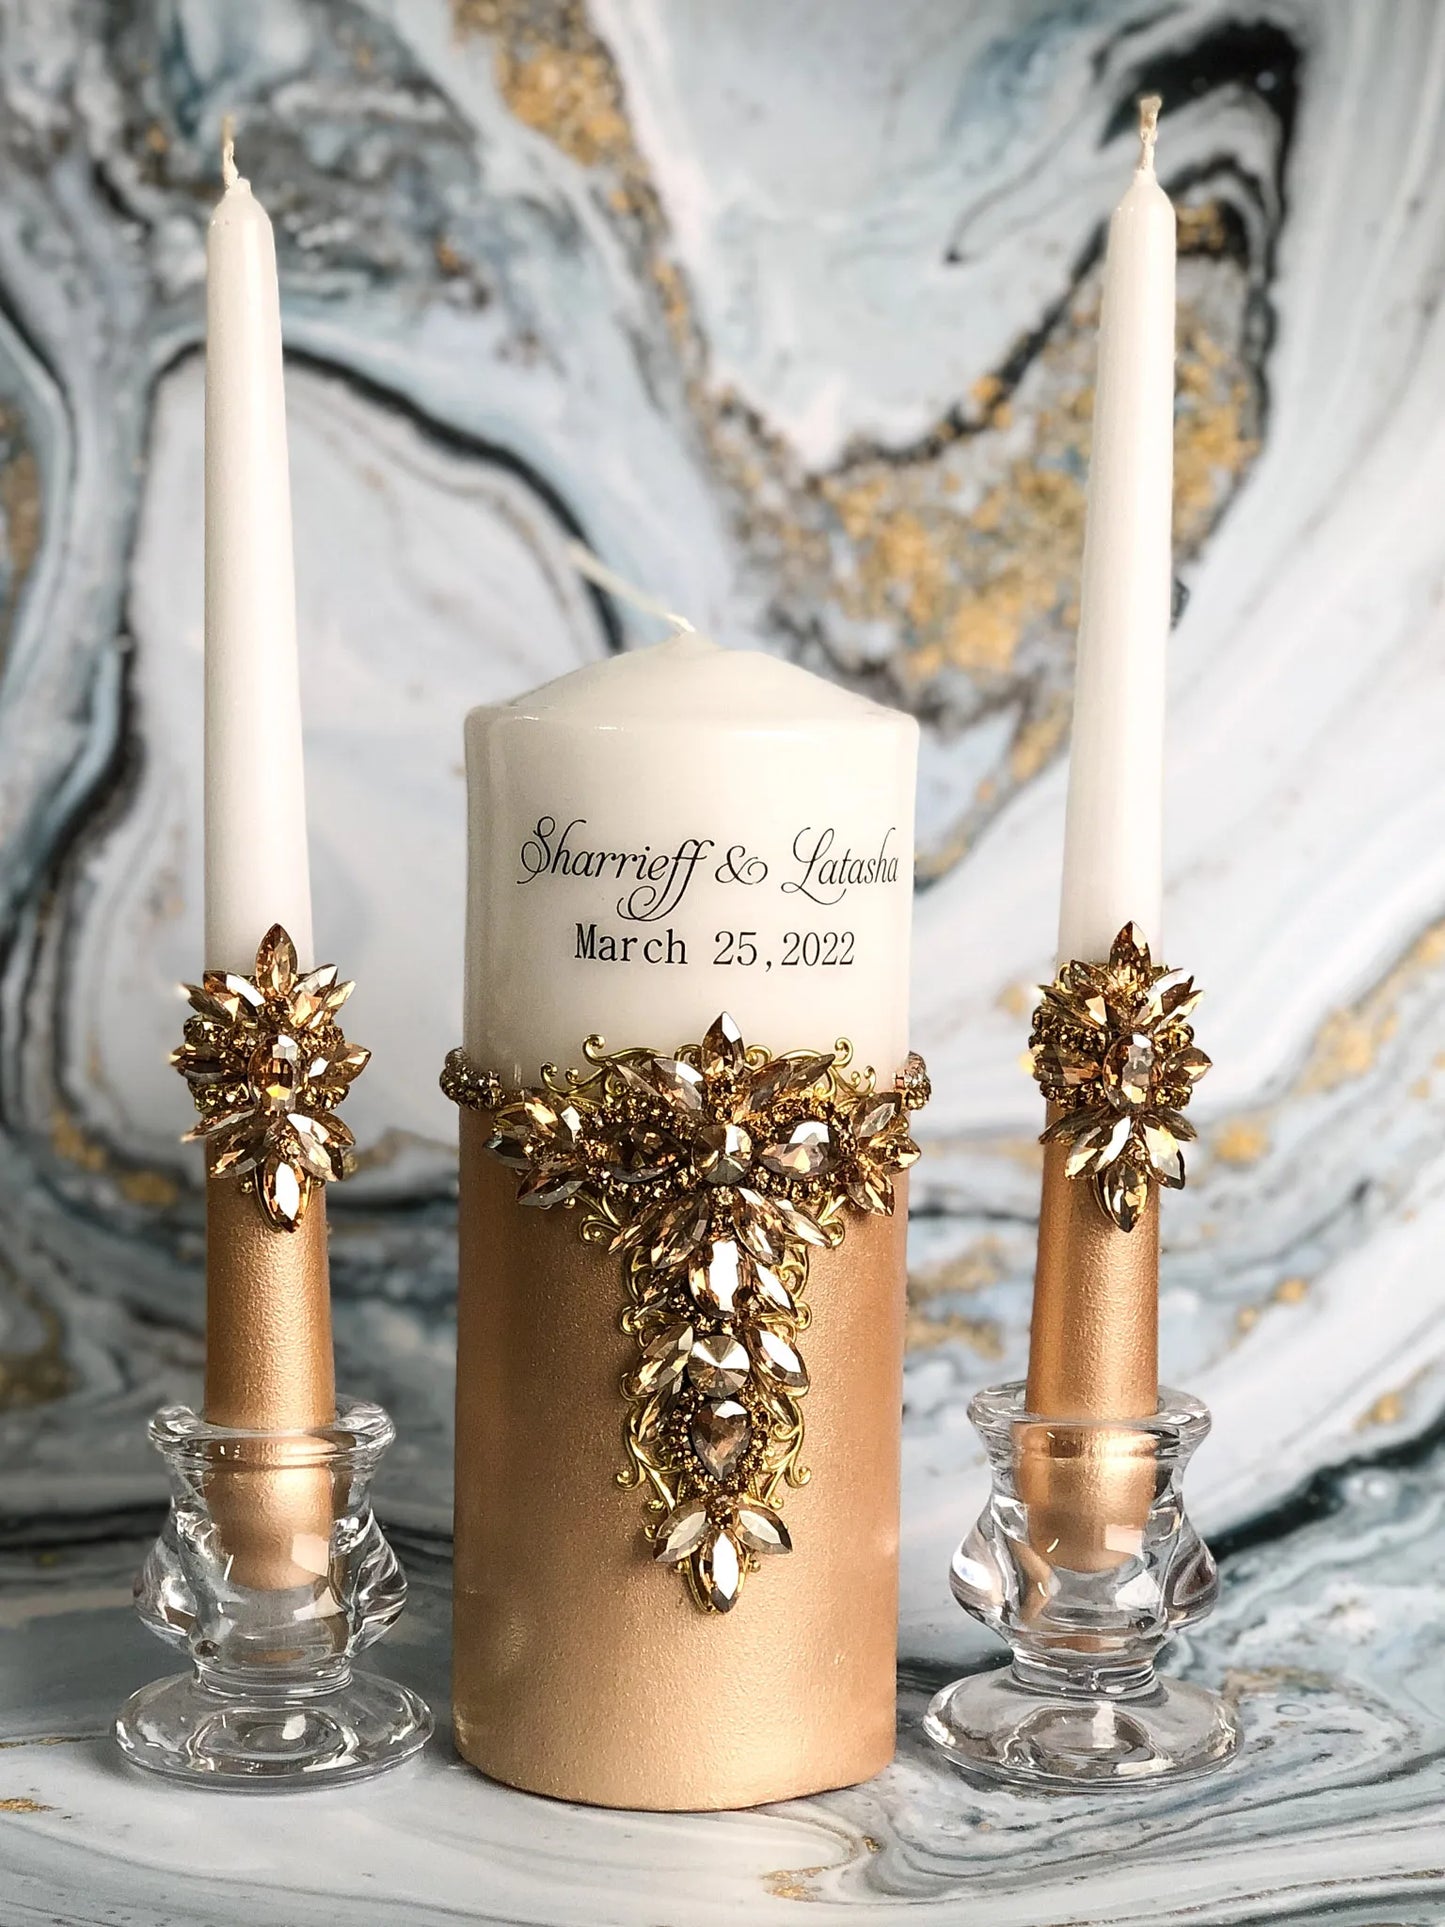 Personalized Unity Candles Set with Names and Date - Gloria Collection